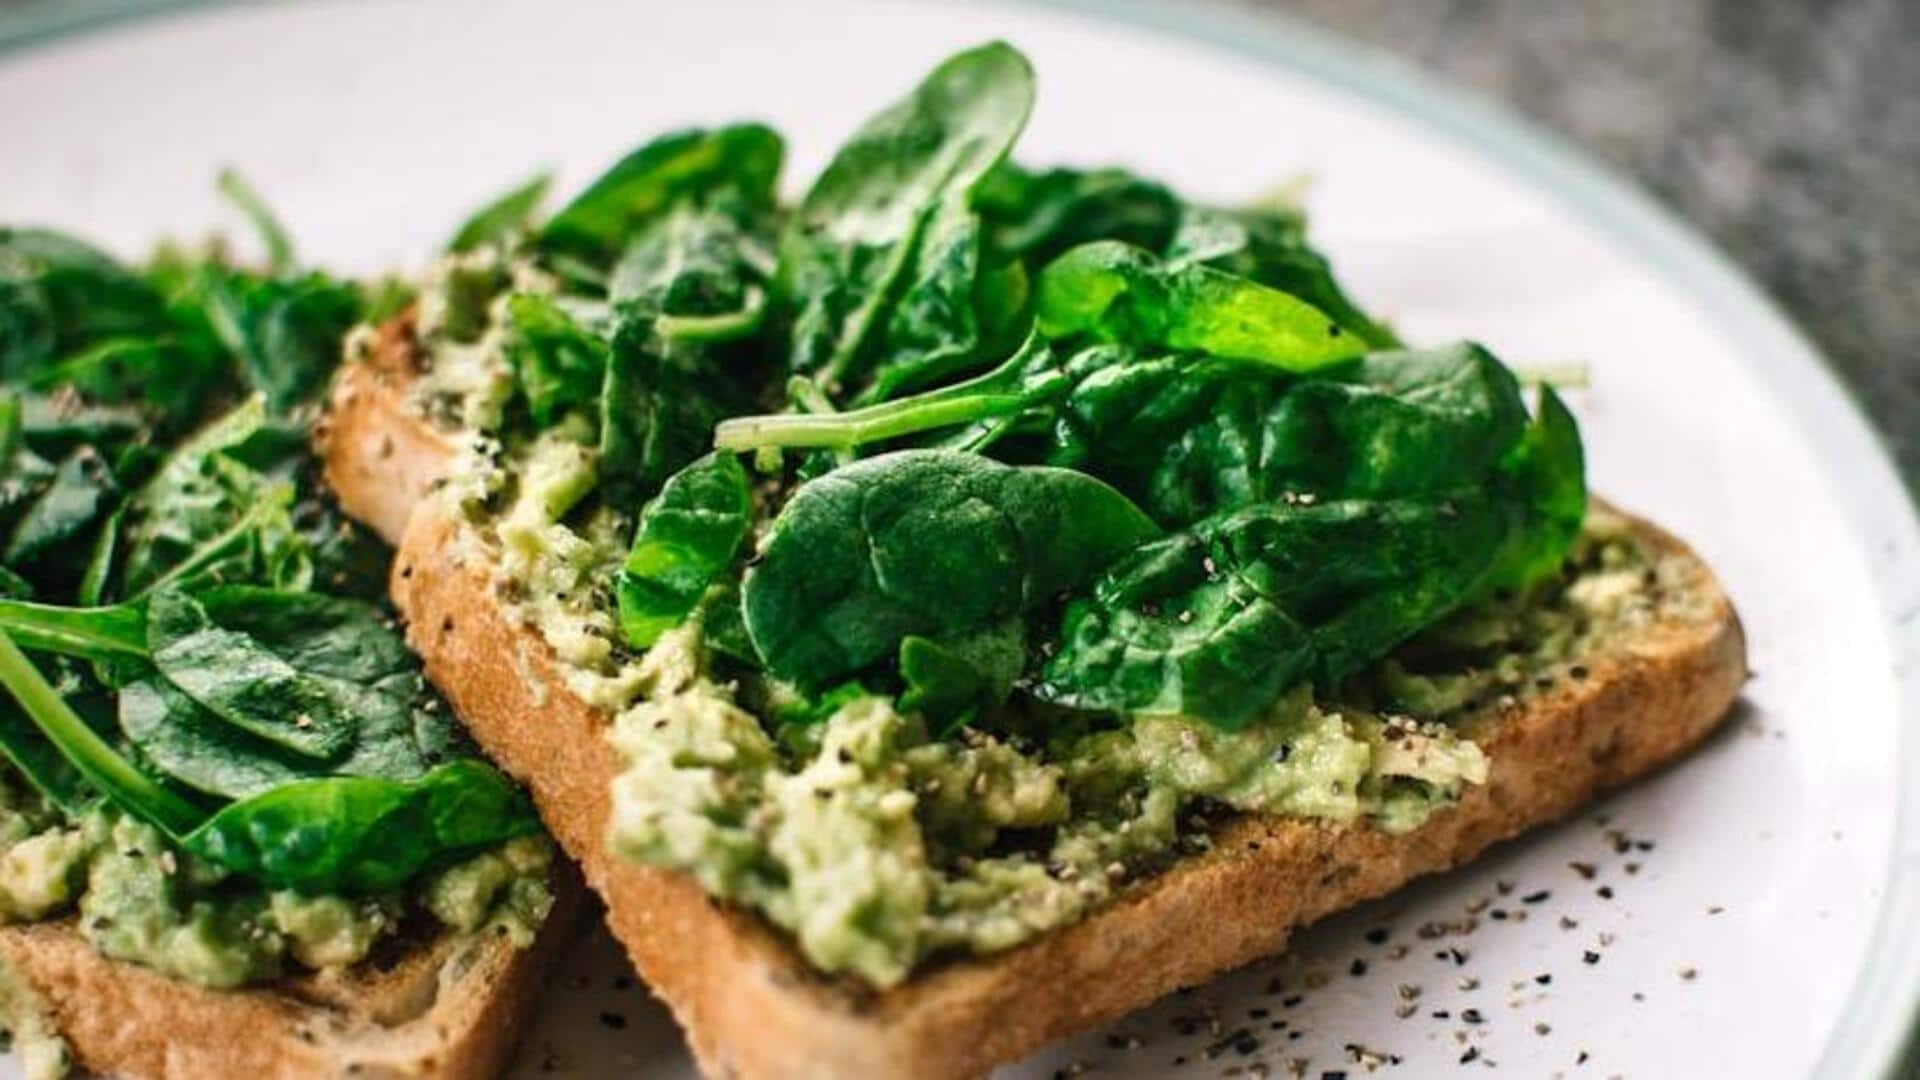 Boost your iron intake with these spinach-based dishes